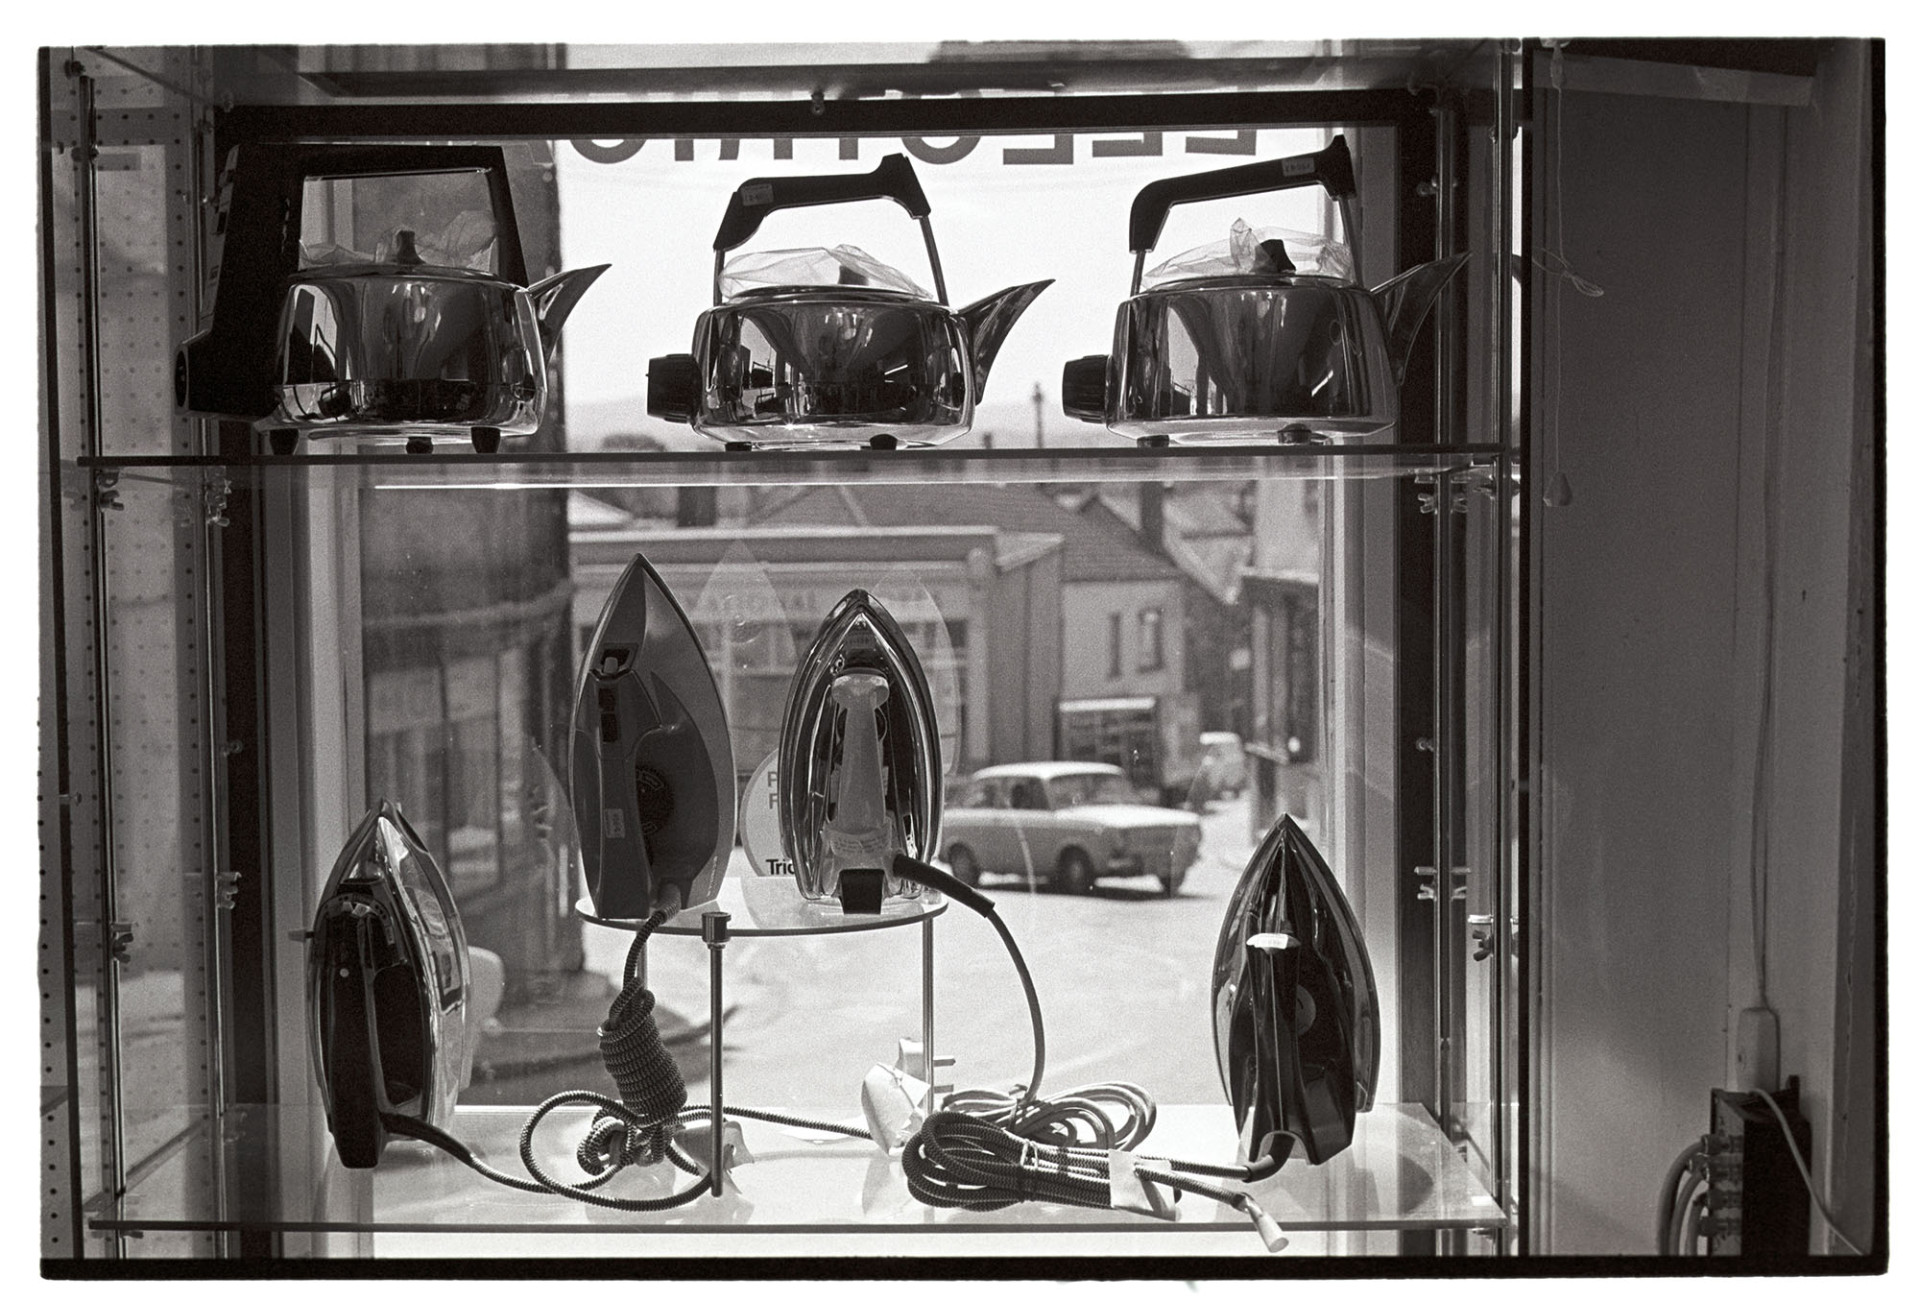 Goods in window of electrical shop, kettles, irons.
[A display of kettles and irons in the window of Hockin's electrical shop, Market Street, Hatherleigh.]